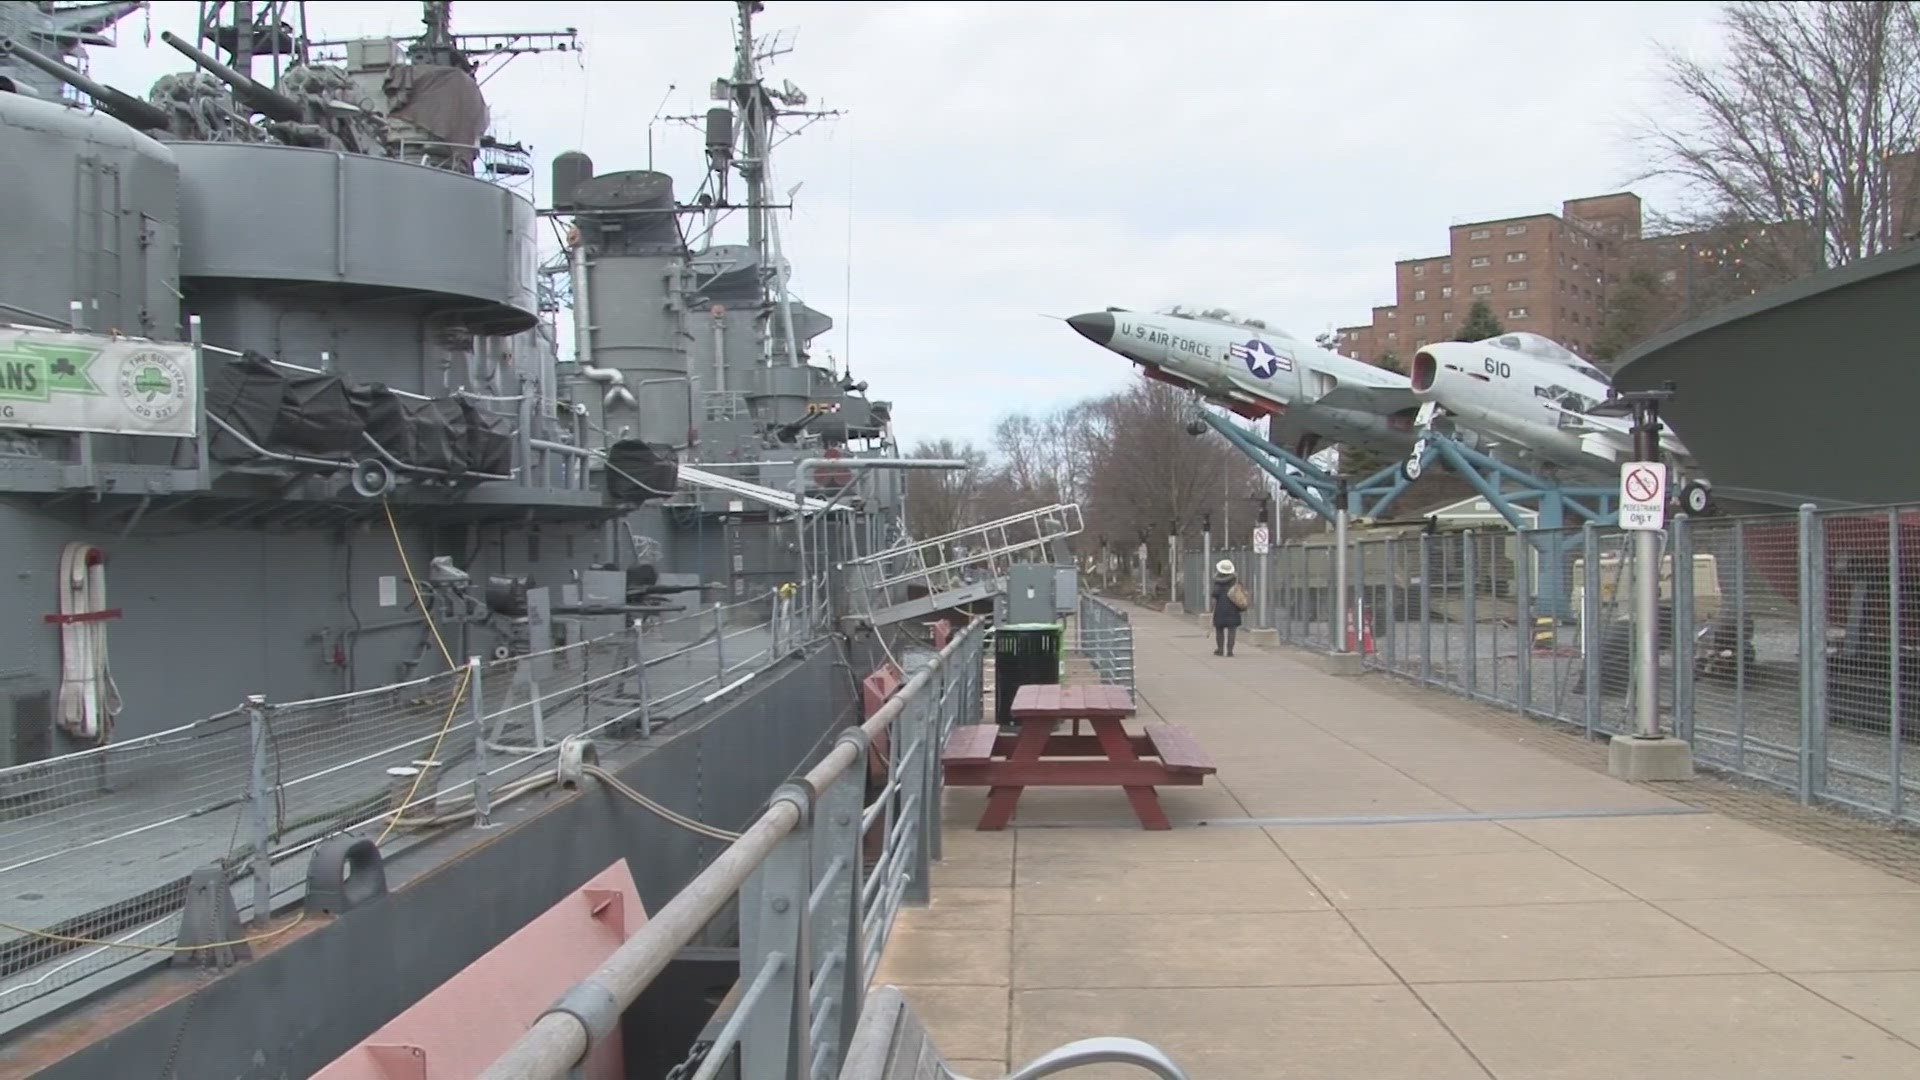 Steps to boost security have been underway at the historic attraction at the Buffalo waterfront, even before news of a recent burglary there.